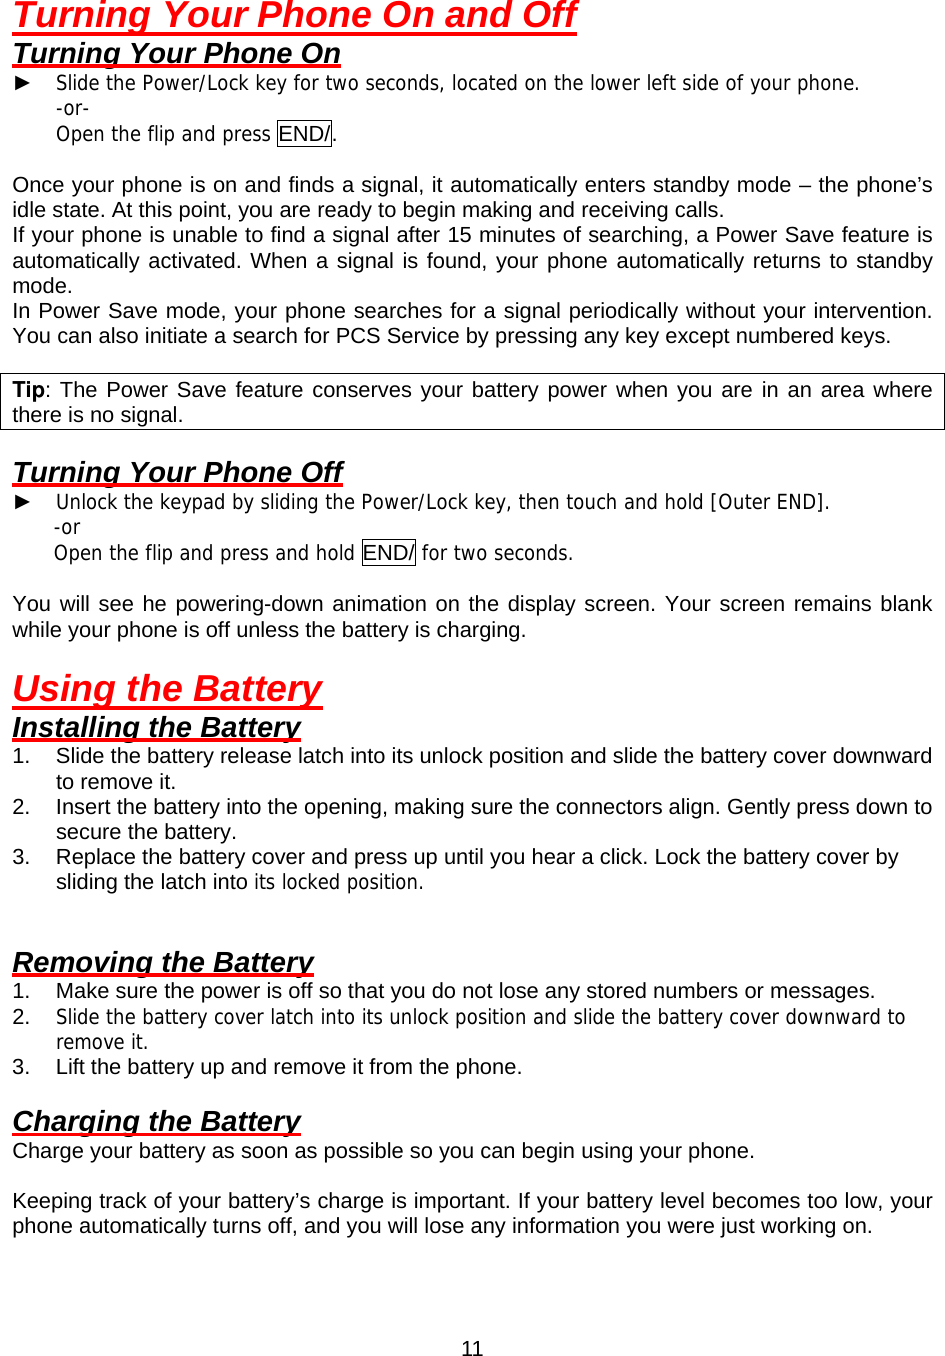  11Turning Your Phone On and Off Turning Your Phone On ► Slide the Power/Lock key for two seconds, located on the lower left side of your phone. -or- Open the flip and press END/.  Once your phone is on and finds a signal, it automatically enters standby mode – the phone’s idle state. At this point, you are ready to begin making and receiving calls. If your phone is unable to find a signal after 15 minutes of searching, a Power Save feature is automatically activated. When a signal is found, your phone automatically returns to standby mode. In Power Save mode, your phone searches for a signal periodically without your intervention.   You can also initiate a search for PCS Service by pressing any key except numbered keys.  Tip: The Power Save feature conserves your battery power when you are in an area where there is no signal.  Turning Your Phone Off ► Unlock the keypad by sliding the Power/Lock key, then touch and hold [Outer END]. -or  Open the flip and press and hold END/ for two seconds.  You will see he powering-down animation on the display screen. Your screen remains blank while your phone is off unless the battery is charging.  Using the Battery Installing the Battery 1.  Slide the battery release latch into its unlock position and slide the battery cover downward to remove it.   2.  Insert the battery into the opening, making sure the connectors align. Gently press down to secure the battery. 3.  Replace the battery cover and press up until you hear a click. Lock the battery cover by sliding the latch into its locked position.   Removing the Battery 1.  Make sure the power is off so that you do not lose any stored numbers or messages. 2.  Slide the battery cover latch into its unlock position and slide the battery cover downward to remove it. 3.  Lift the battery up and remove it from the phone.  Charging the Battery Charge your battery as soon as possible so you can begin using your phone.  Keeping track of your battery’s charge is important. If your battery level becomes too low, your phone automatically turns off, and you will lose any information you were just working on.   